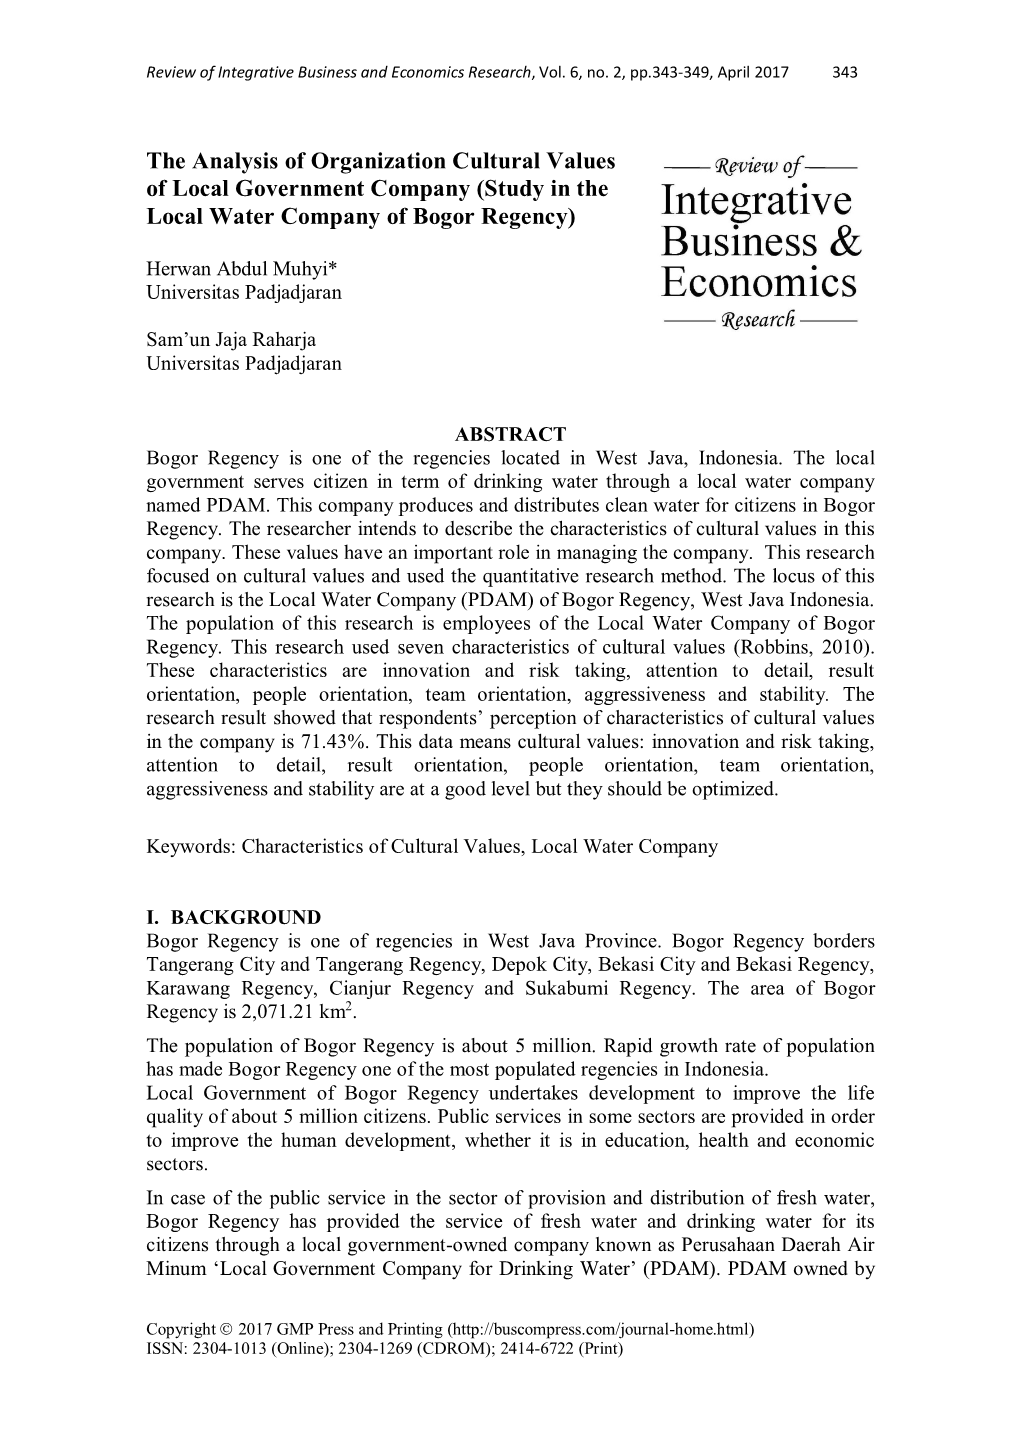 The Analysis of Organization Cultural Values of Local Government Company (Study in the Local Water Company of Bogor Regency)